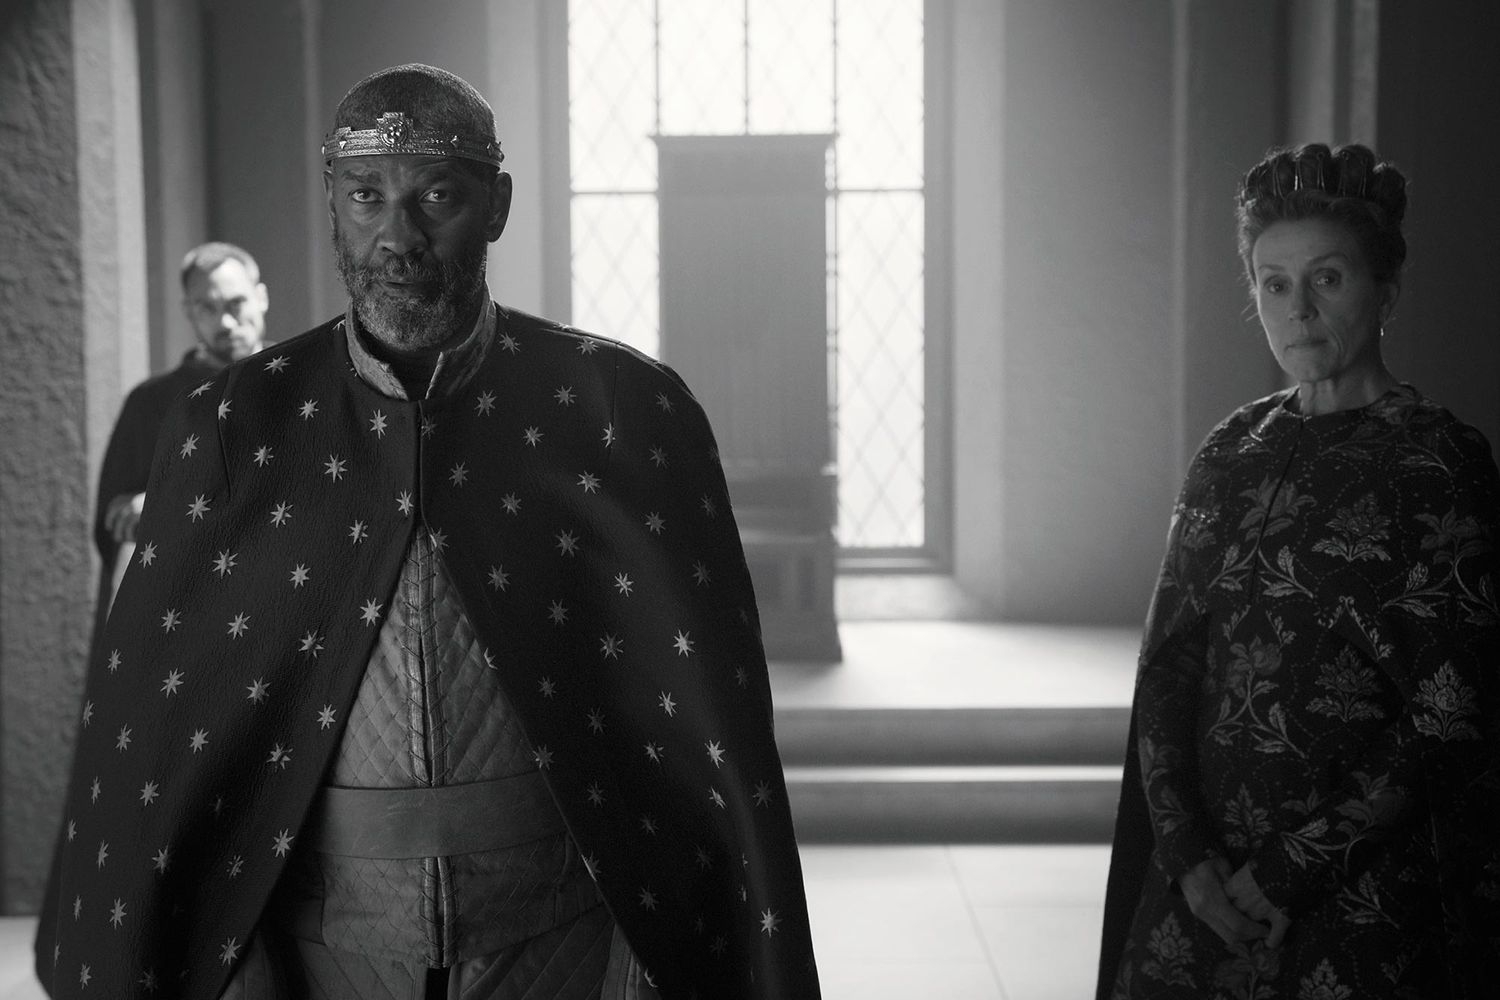 Denzel Washington and Frances McDormand in costume as Lord and Lady MacBeth